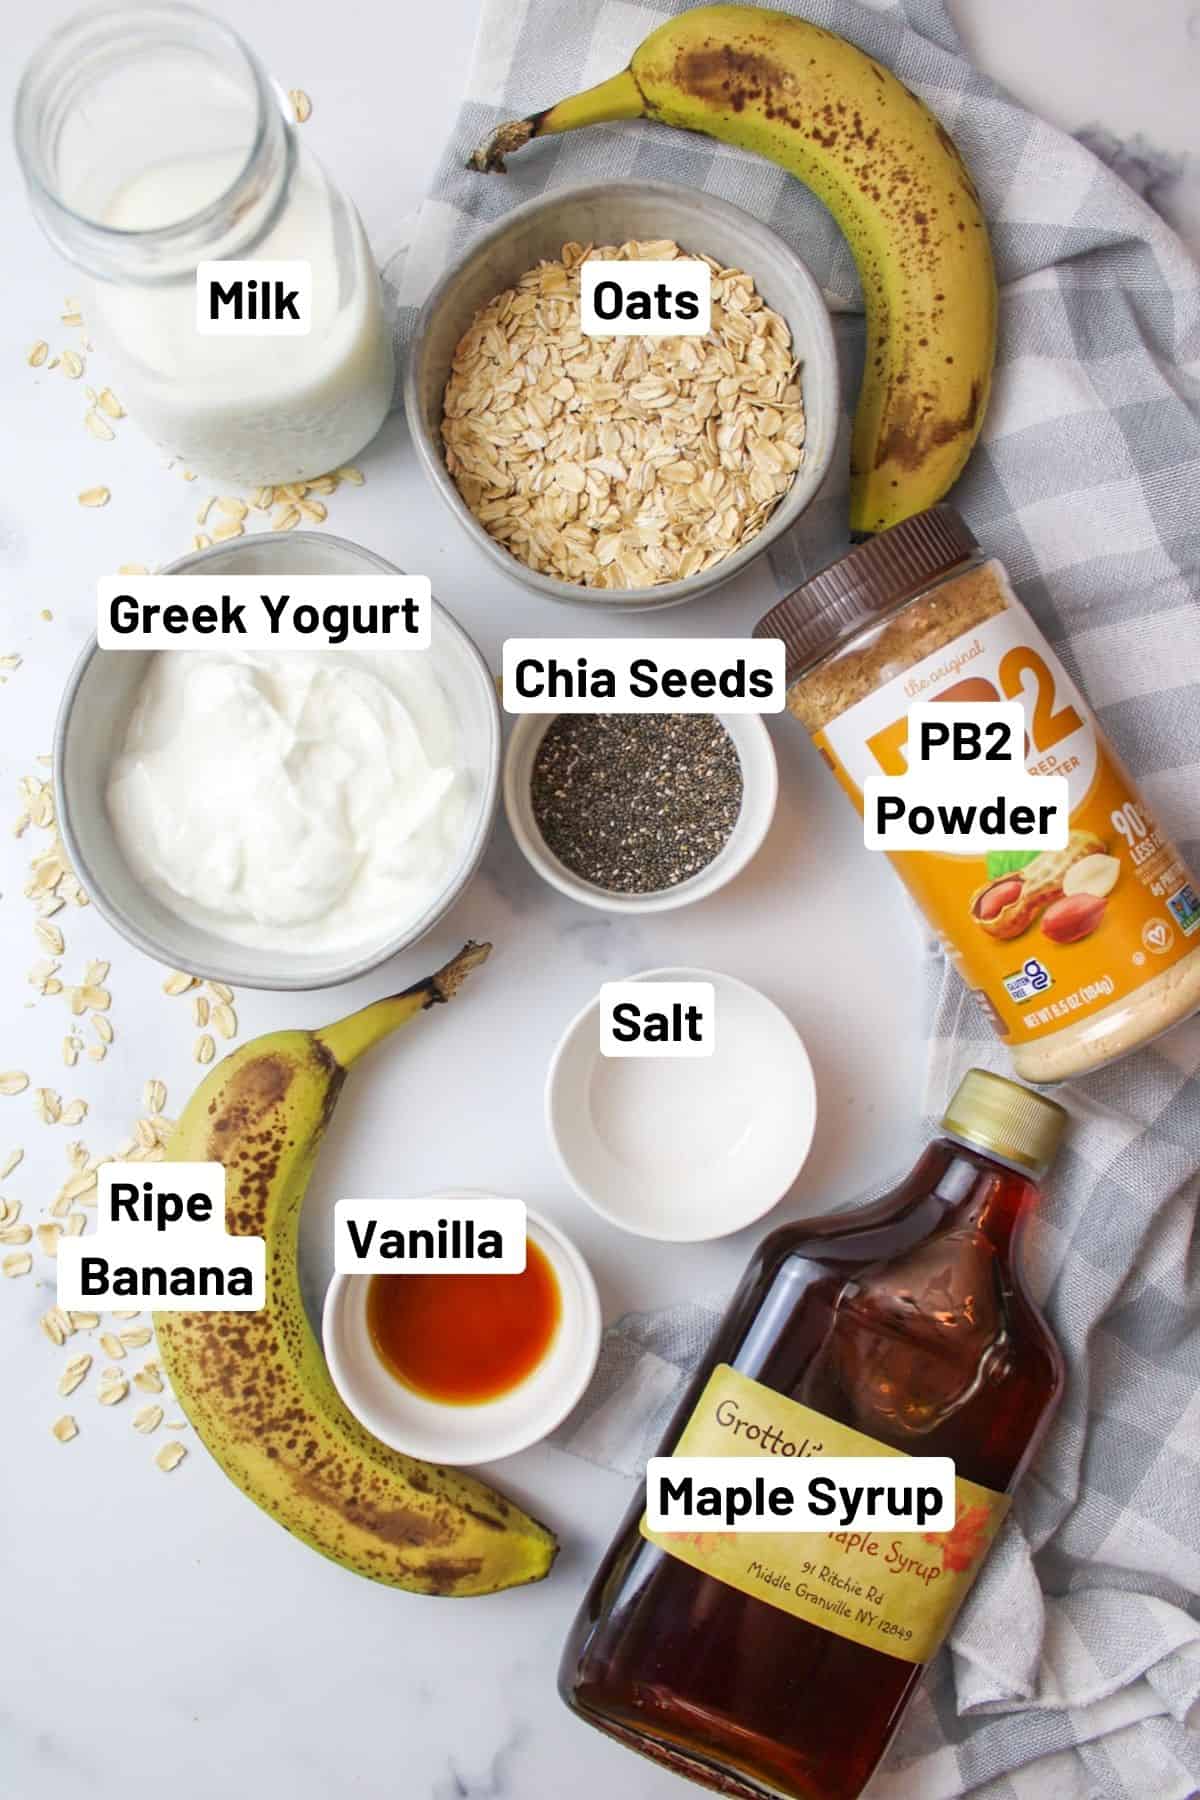 ingredients needed for peanut butter banana overnight oats.